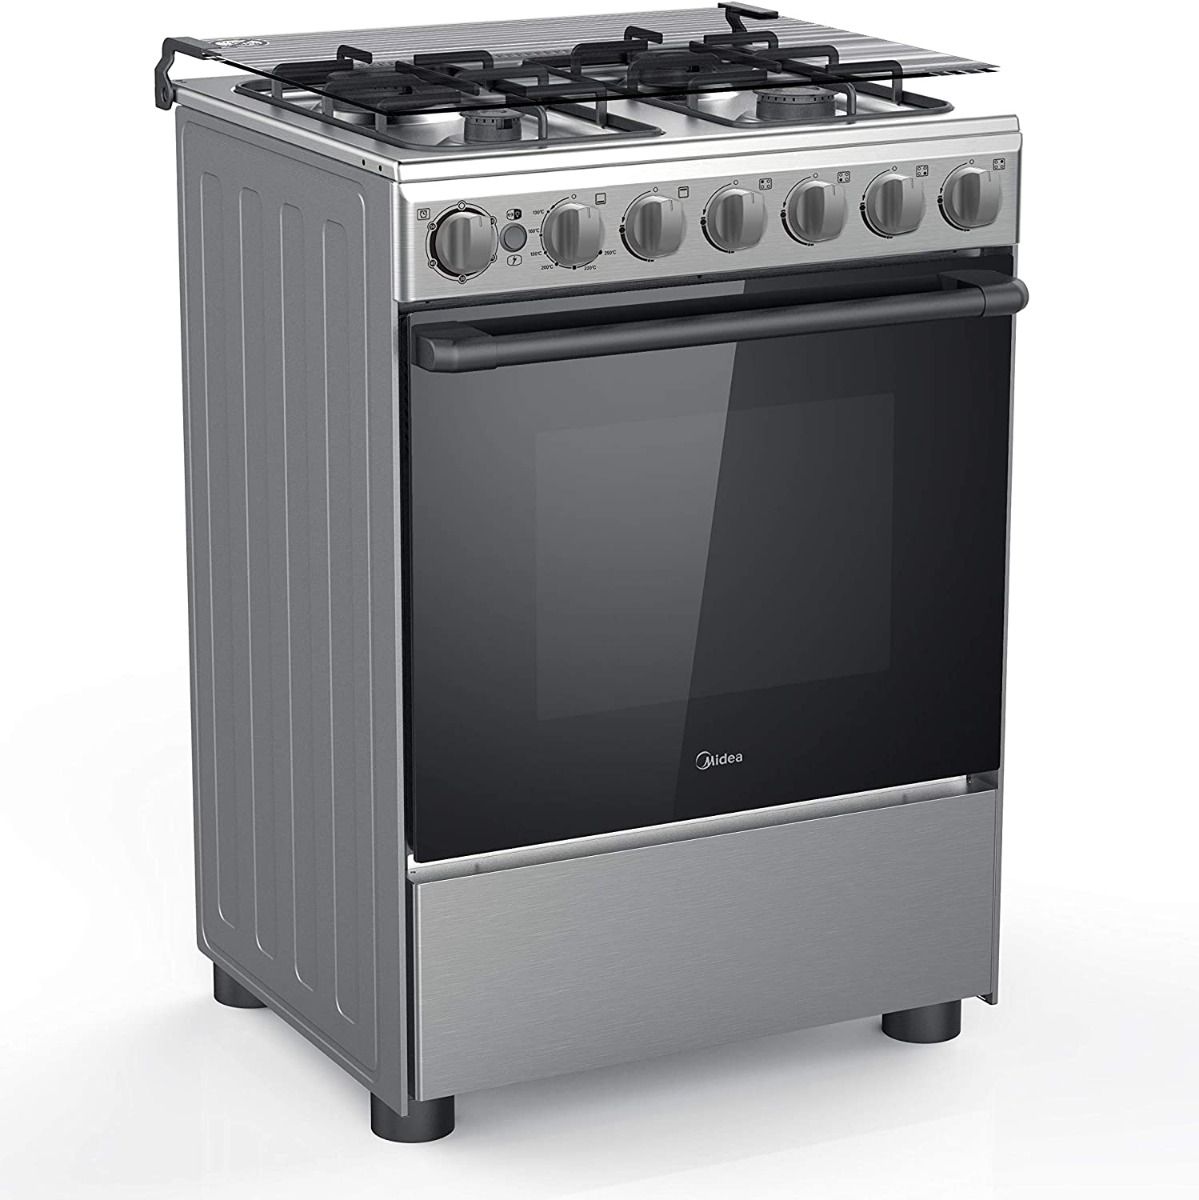 Midea BME62058FFD-D 60cm Gas Cooker, with Full Safety, Auto Ignition, Rotisserie